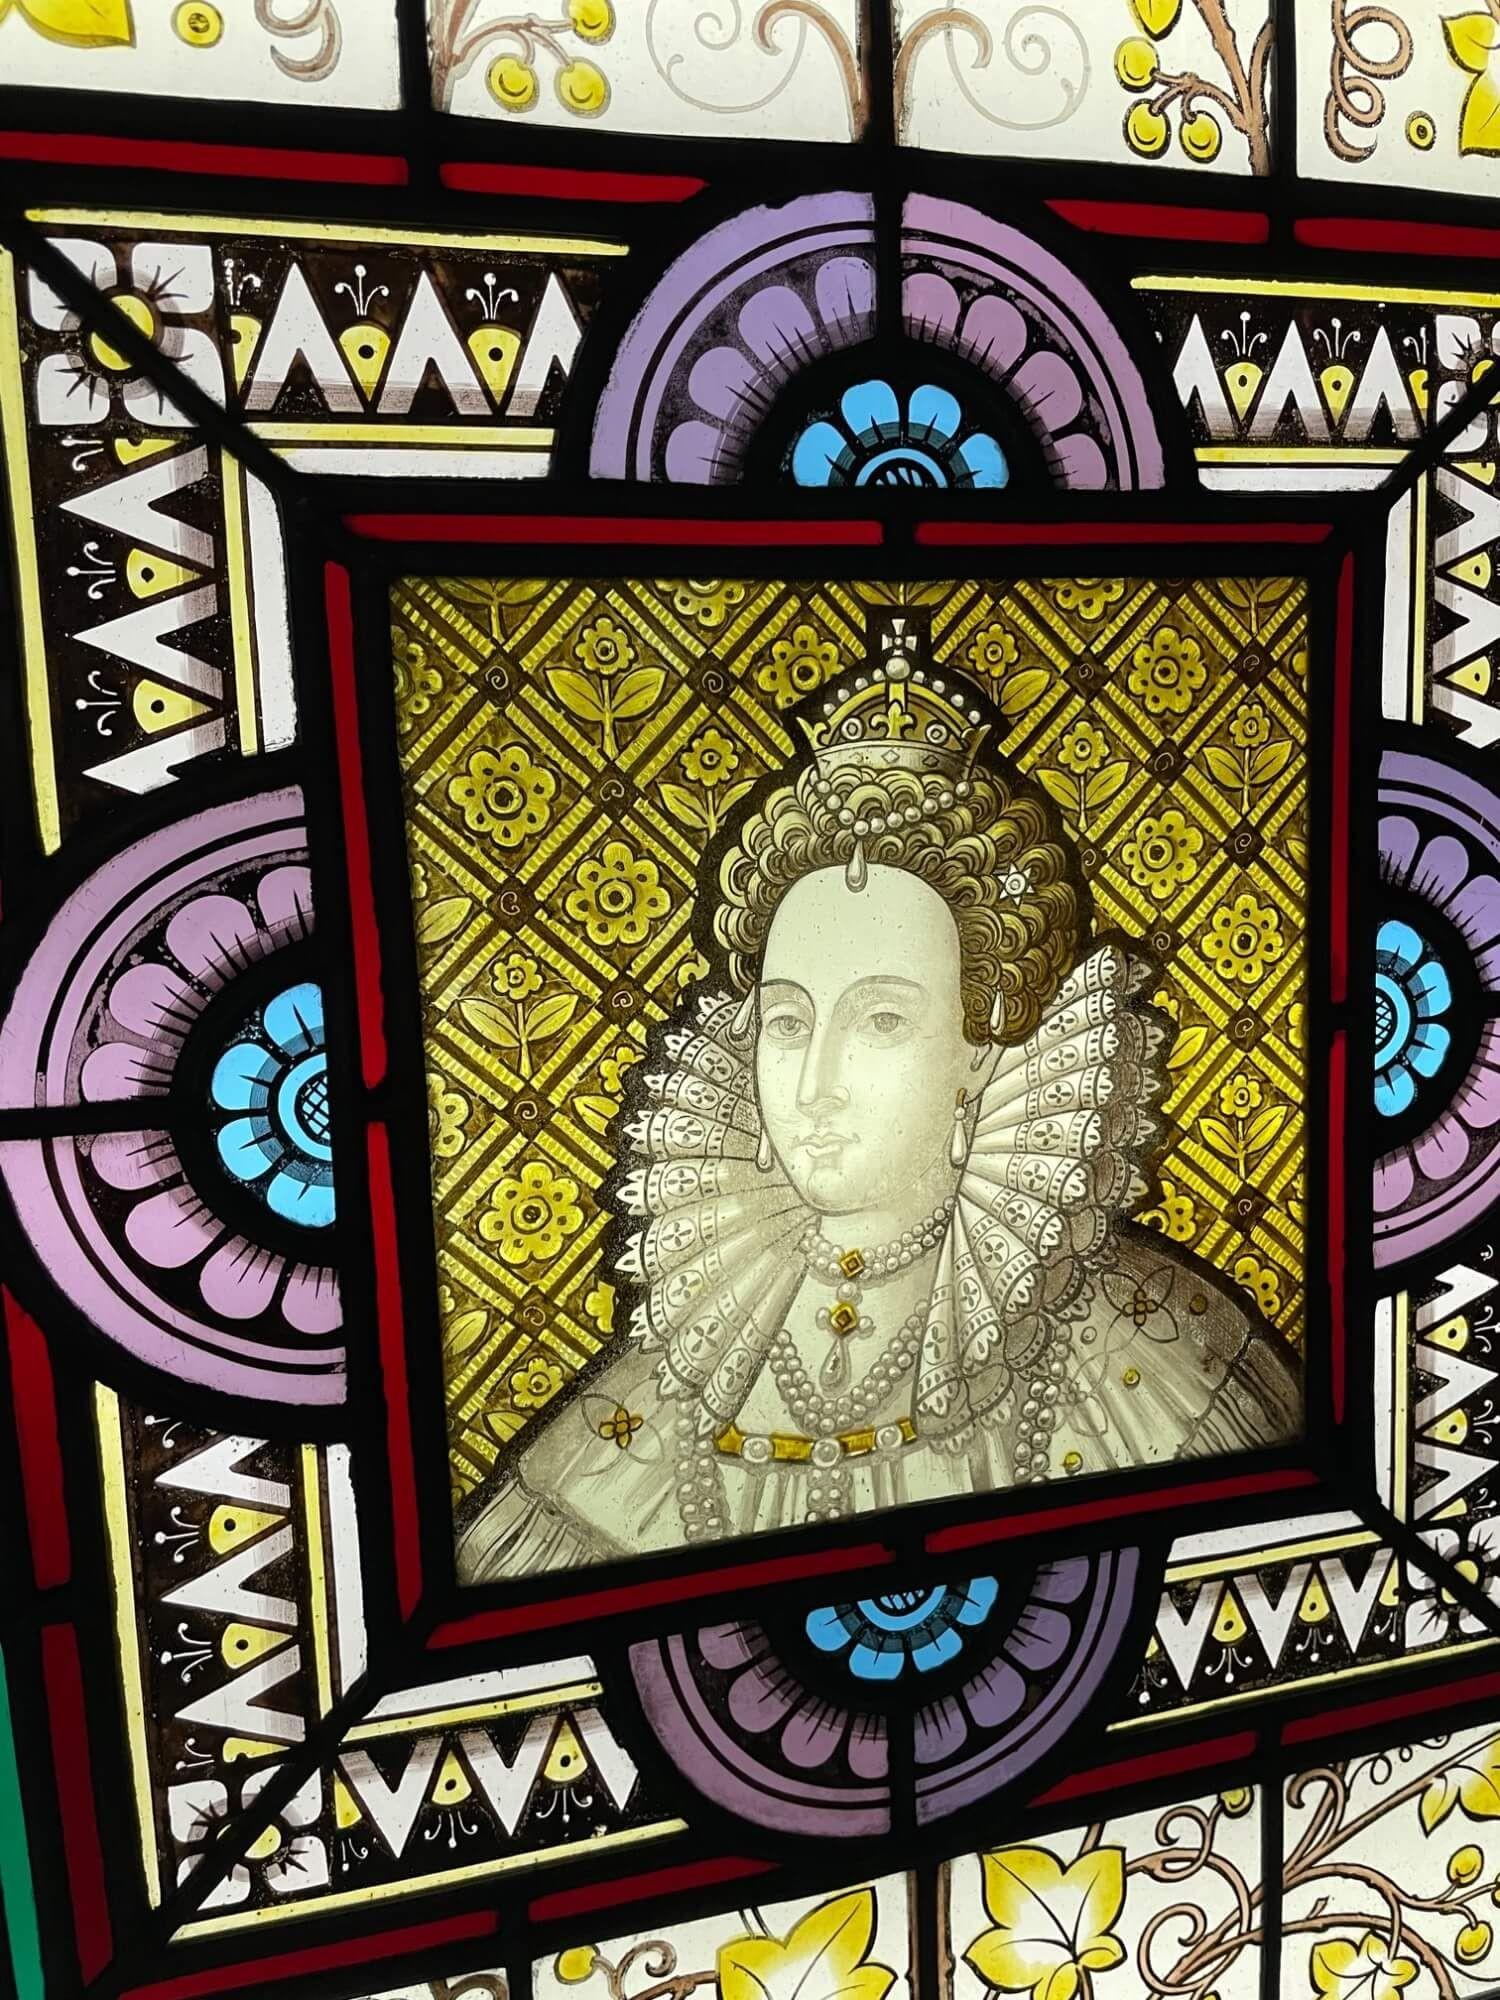 A late 19th century antique stained glass window panel depicting Queen Elizabeth I, one of 3 similar we are selling depicting notable figures of British history. At the centre is a distinguishable illustration of Elizabeth I, Queen of England from